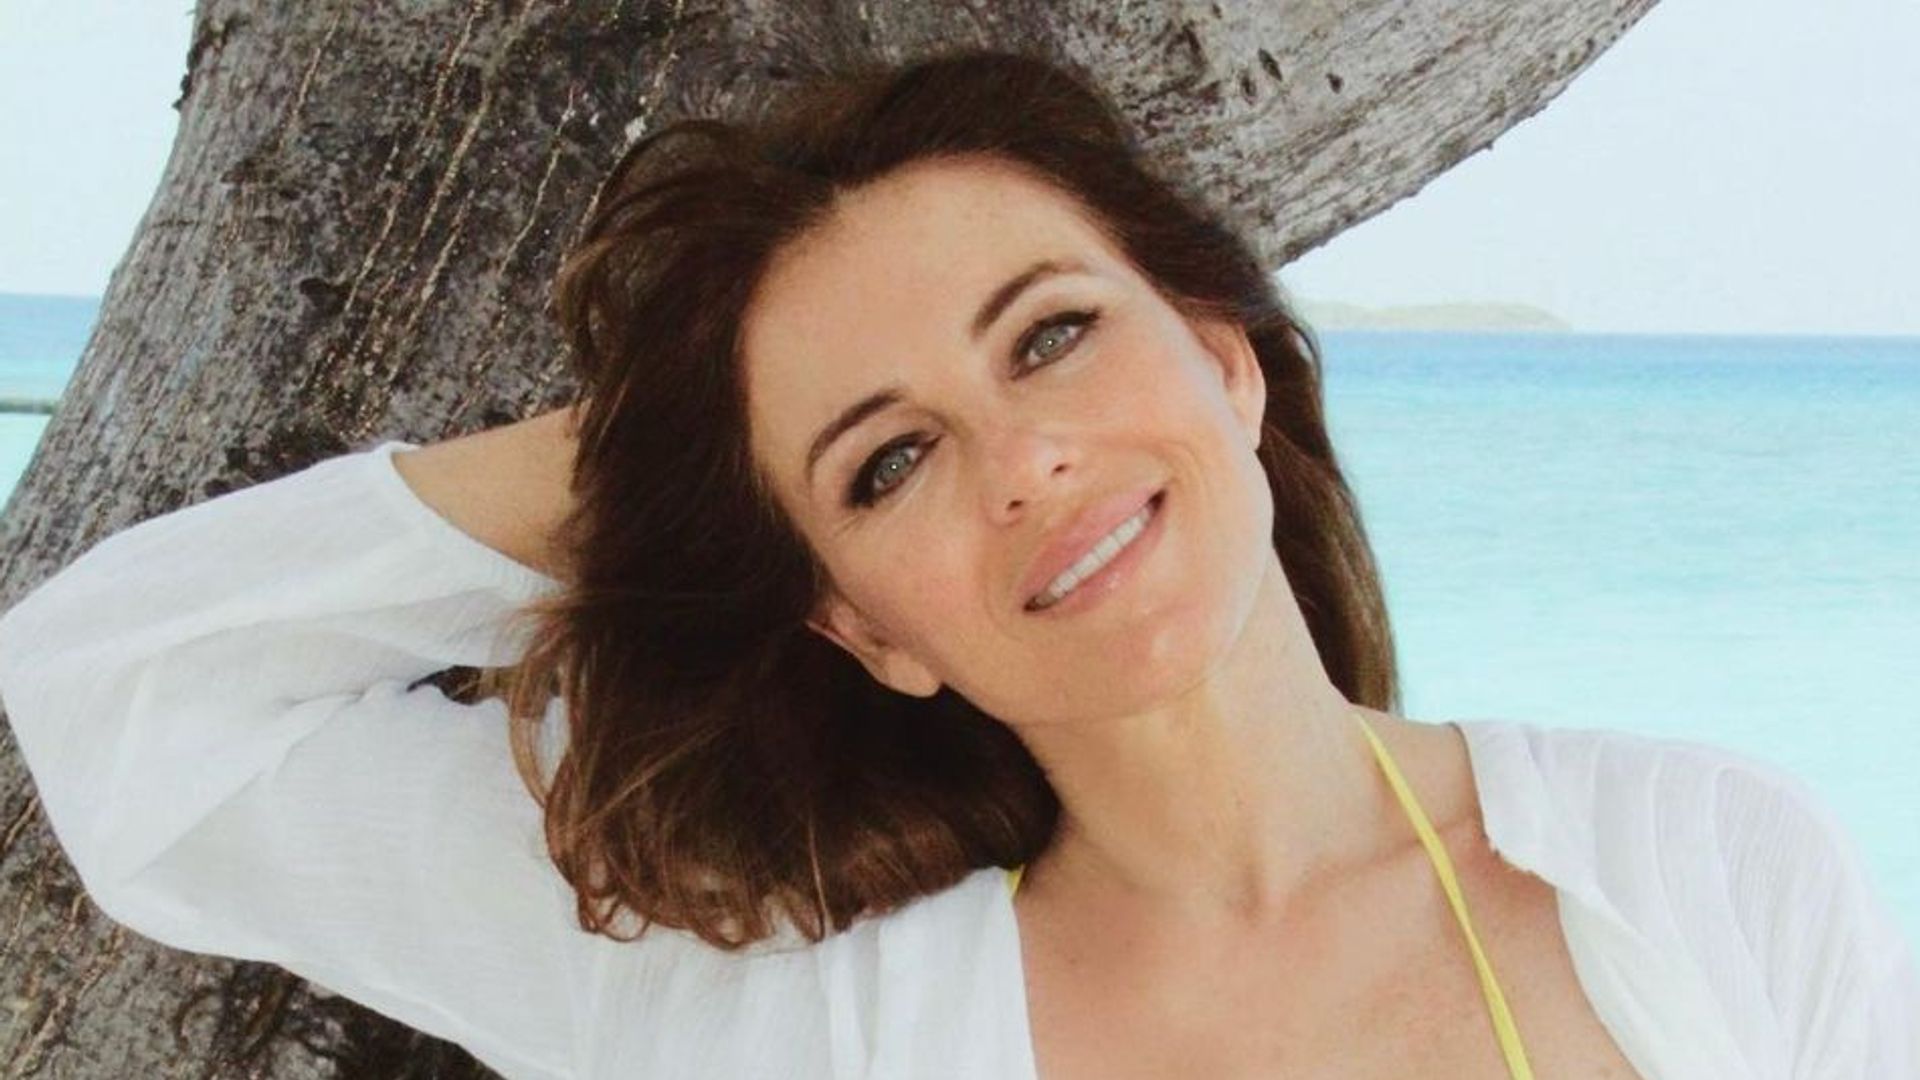 Elizabeth Hurley poses by the beach in a yellow bikini in a photo shared on Instagram